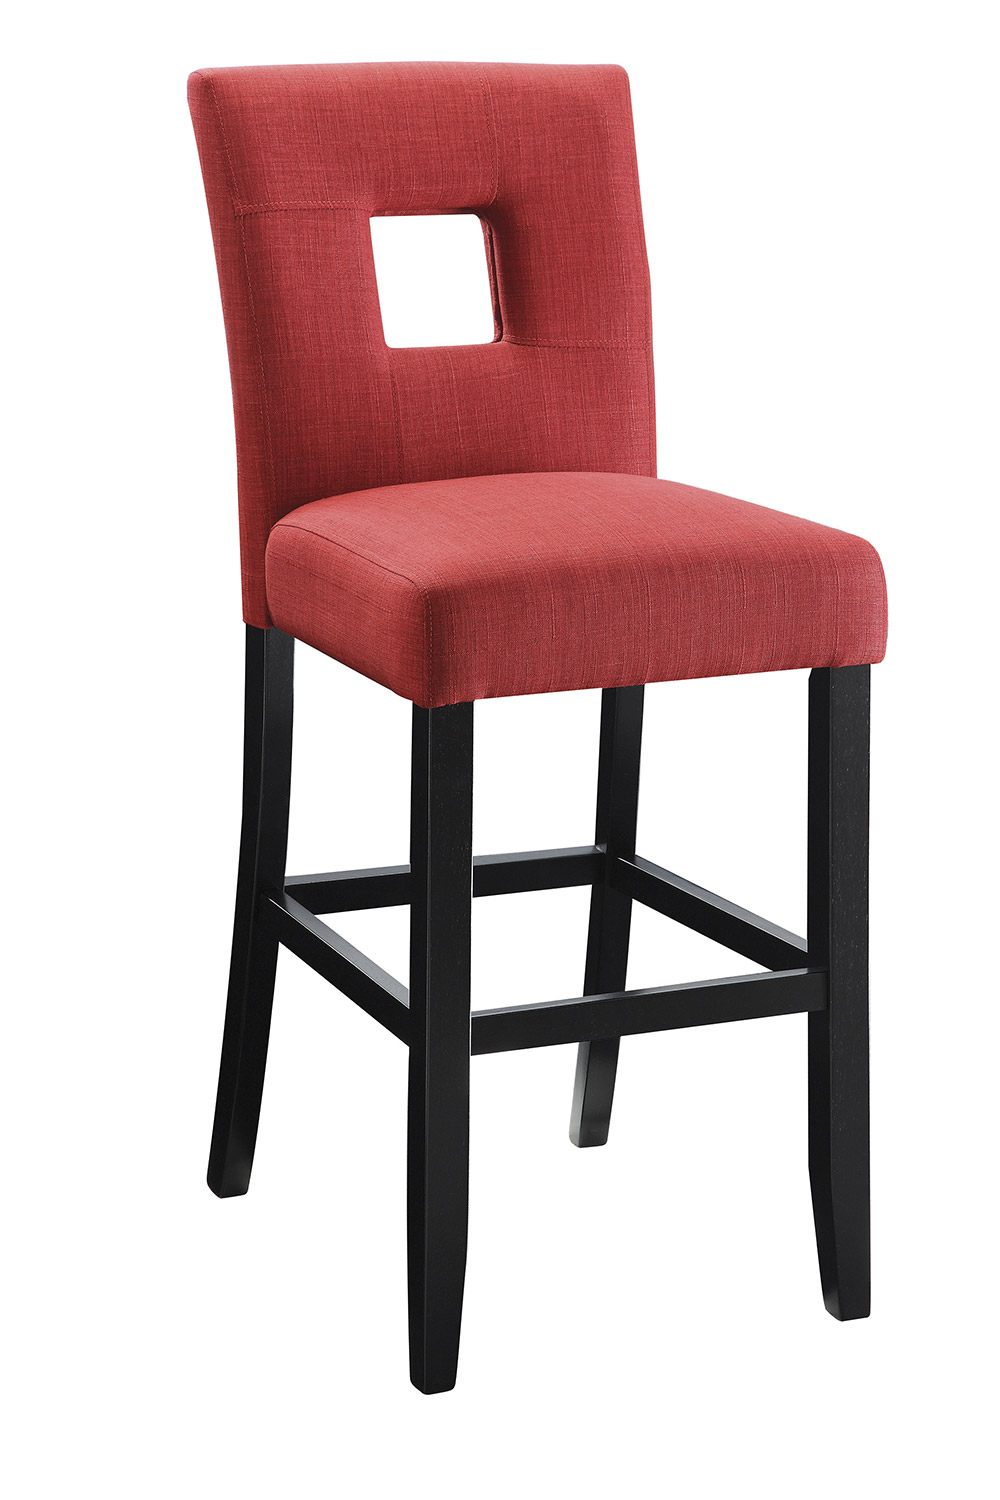 Coaster Andenne Counter Height Chair - Red/Black